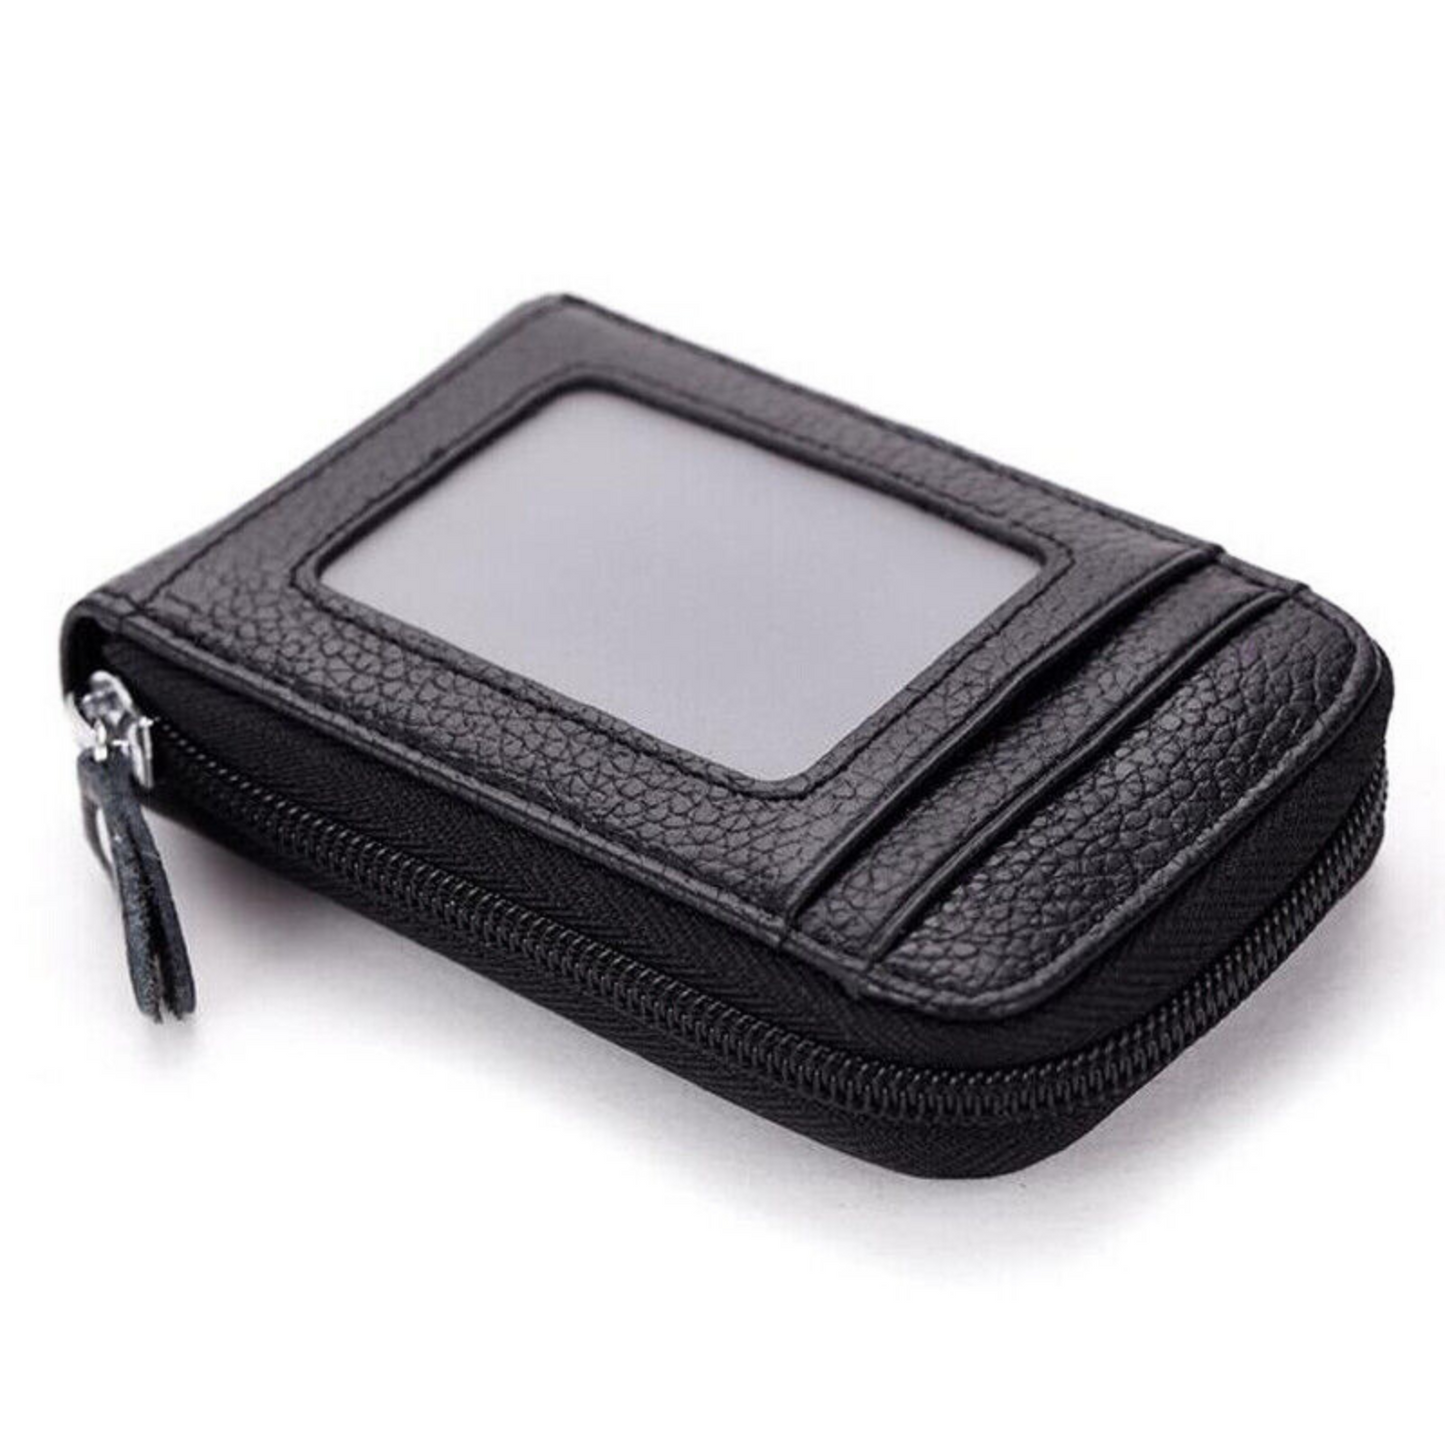 Anti-theft Credit Card Holder RFID Blocking Leather Wallet Coin Purse Black